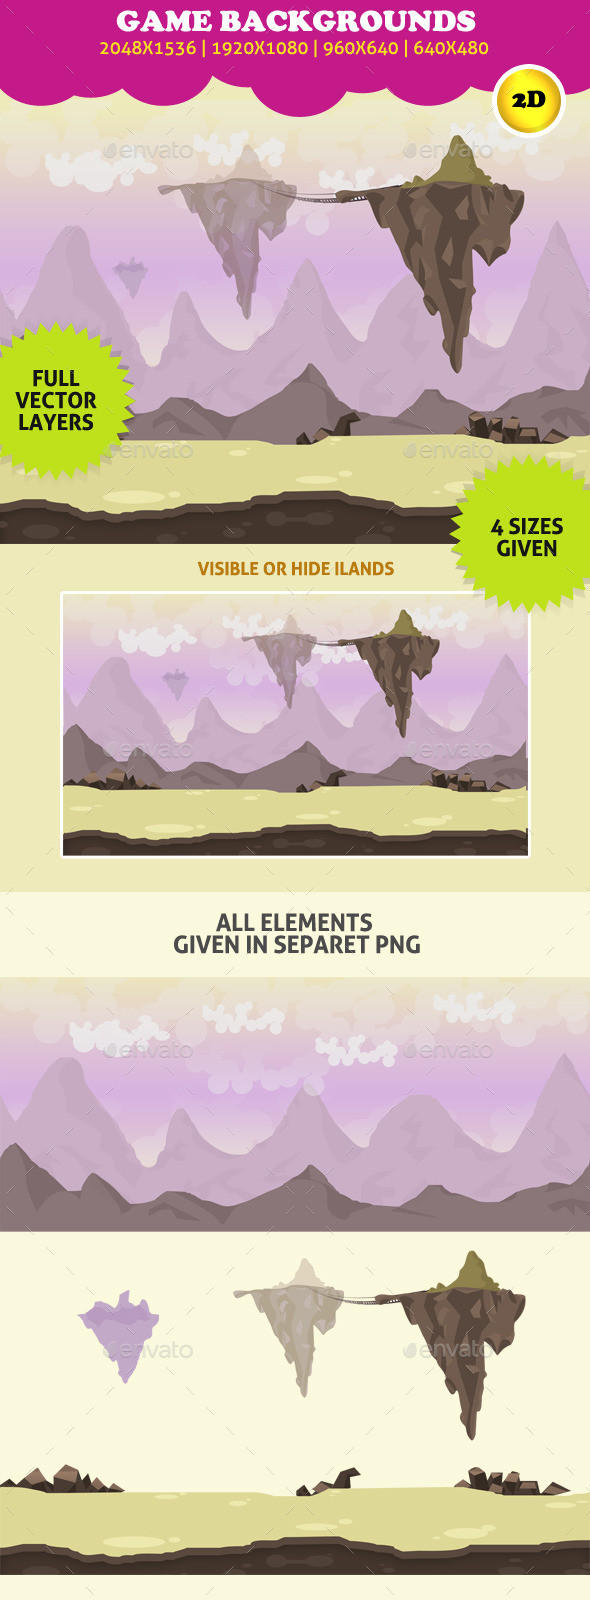 Fantasy floating island game background pack preview